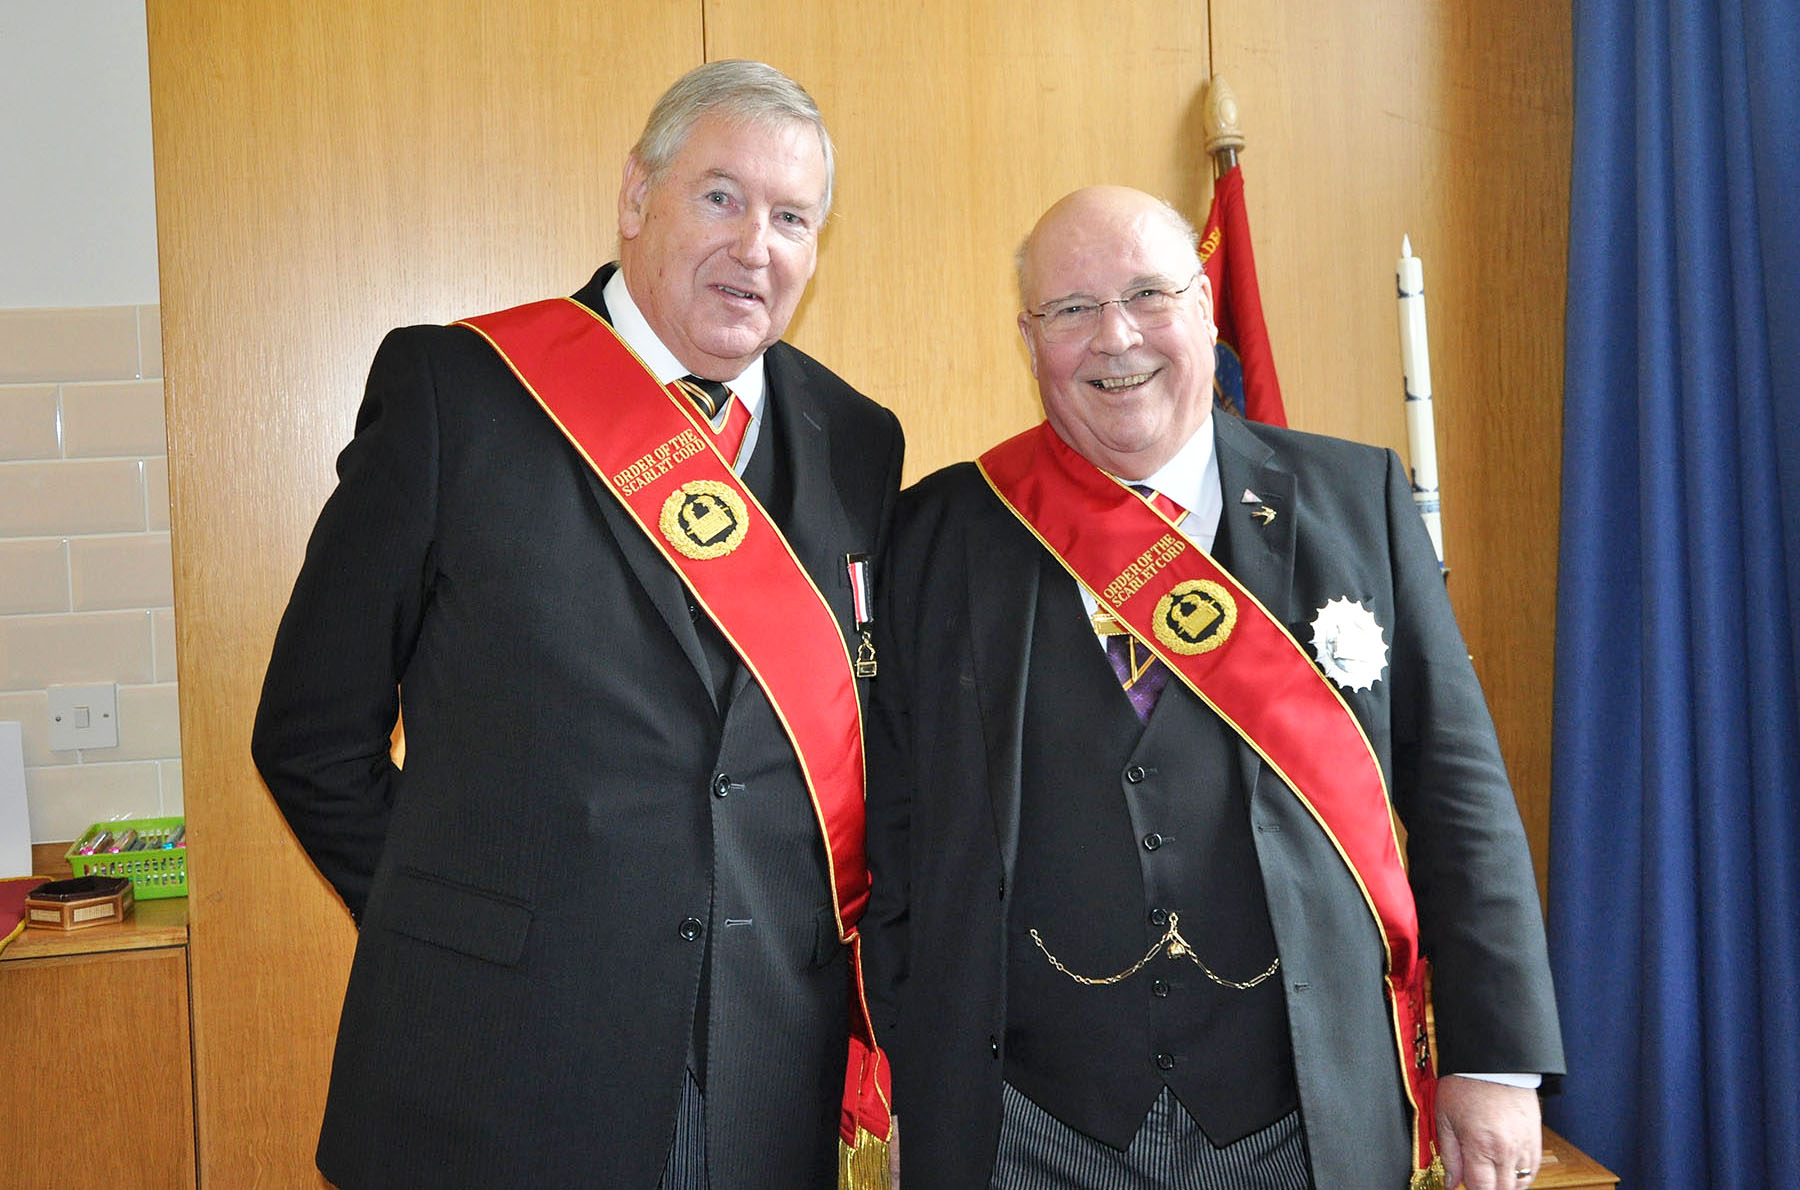 The Installation of a New Provincial Grand Summus